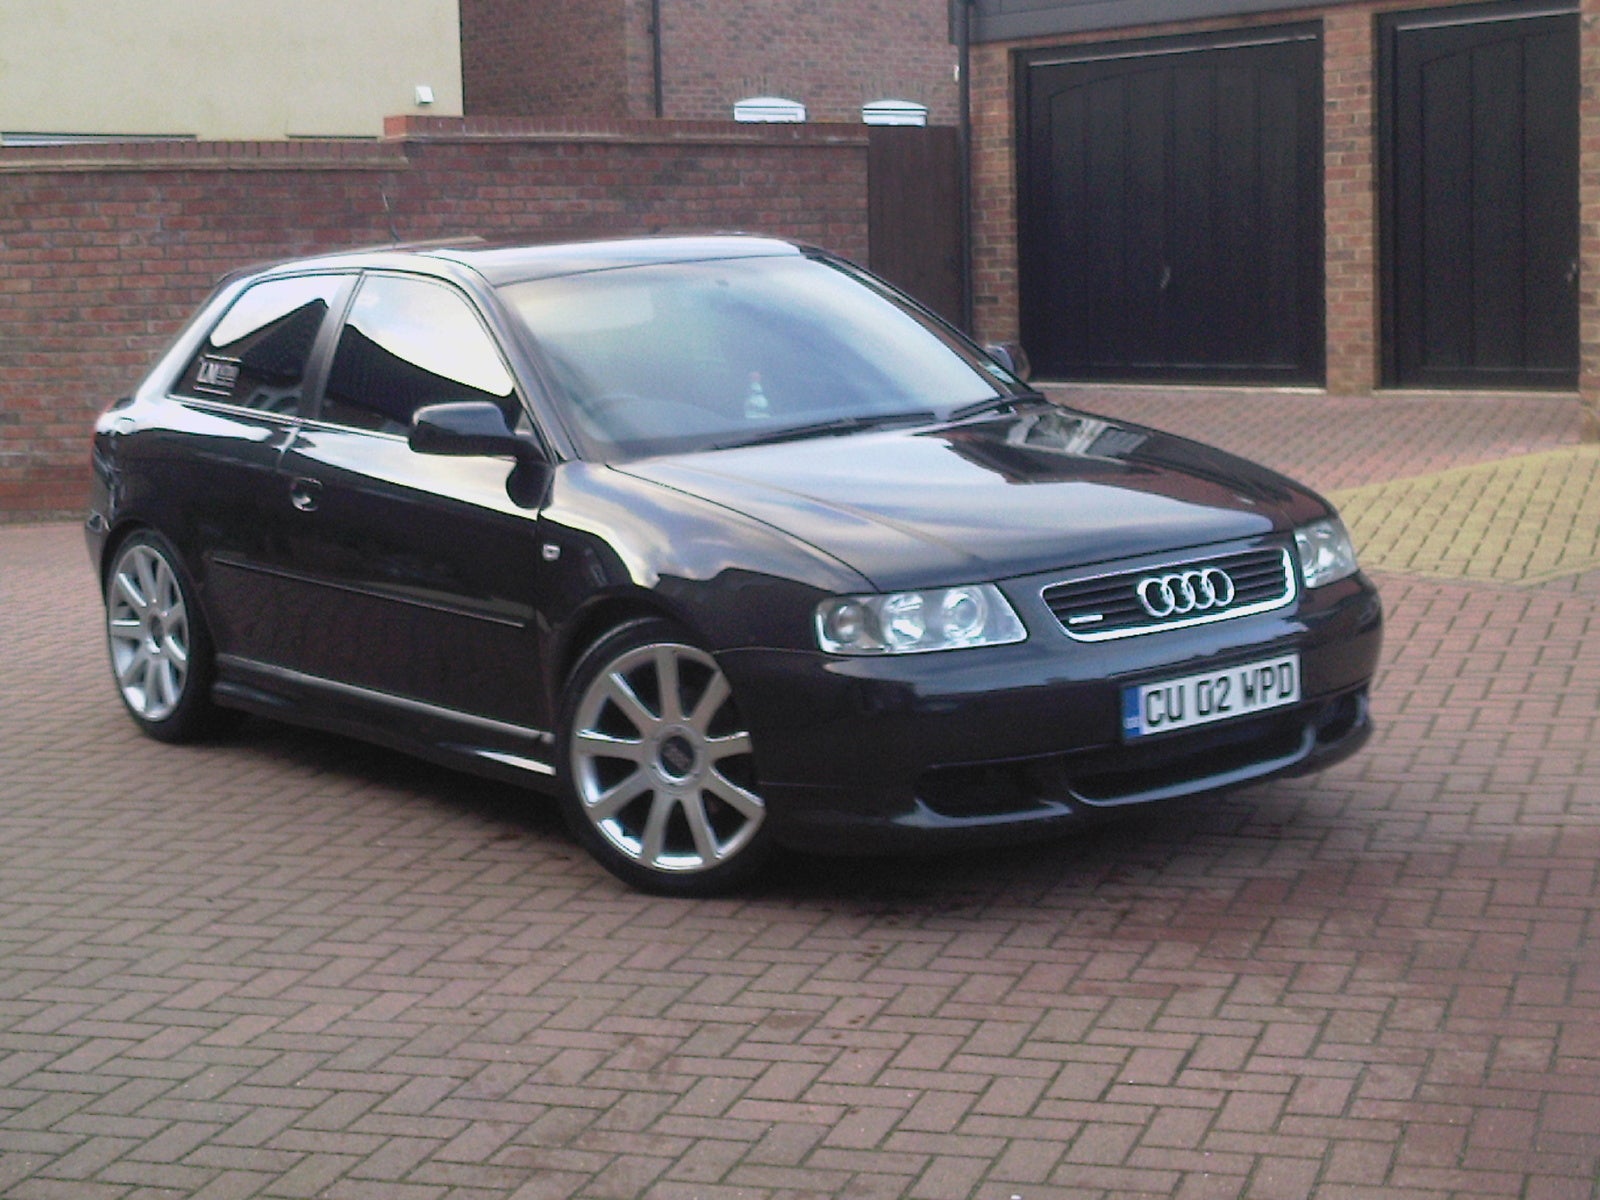  Audi on 2002 Audi A3  A3 1 9tdi Quattro Sport With Loads Of Mods For Sale   6k